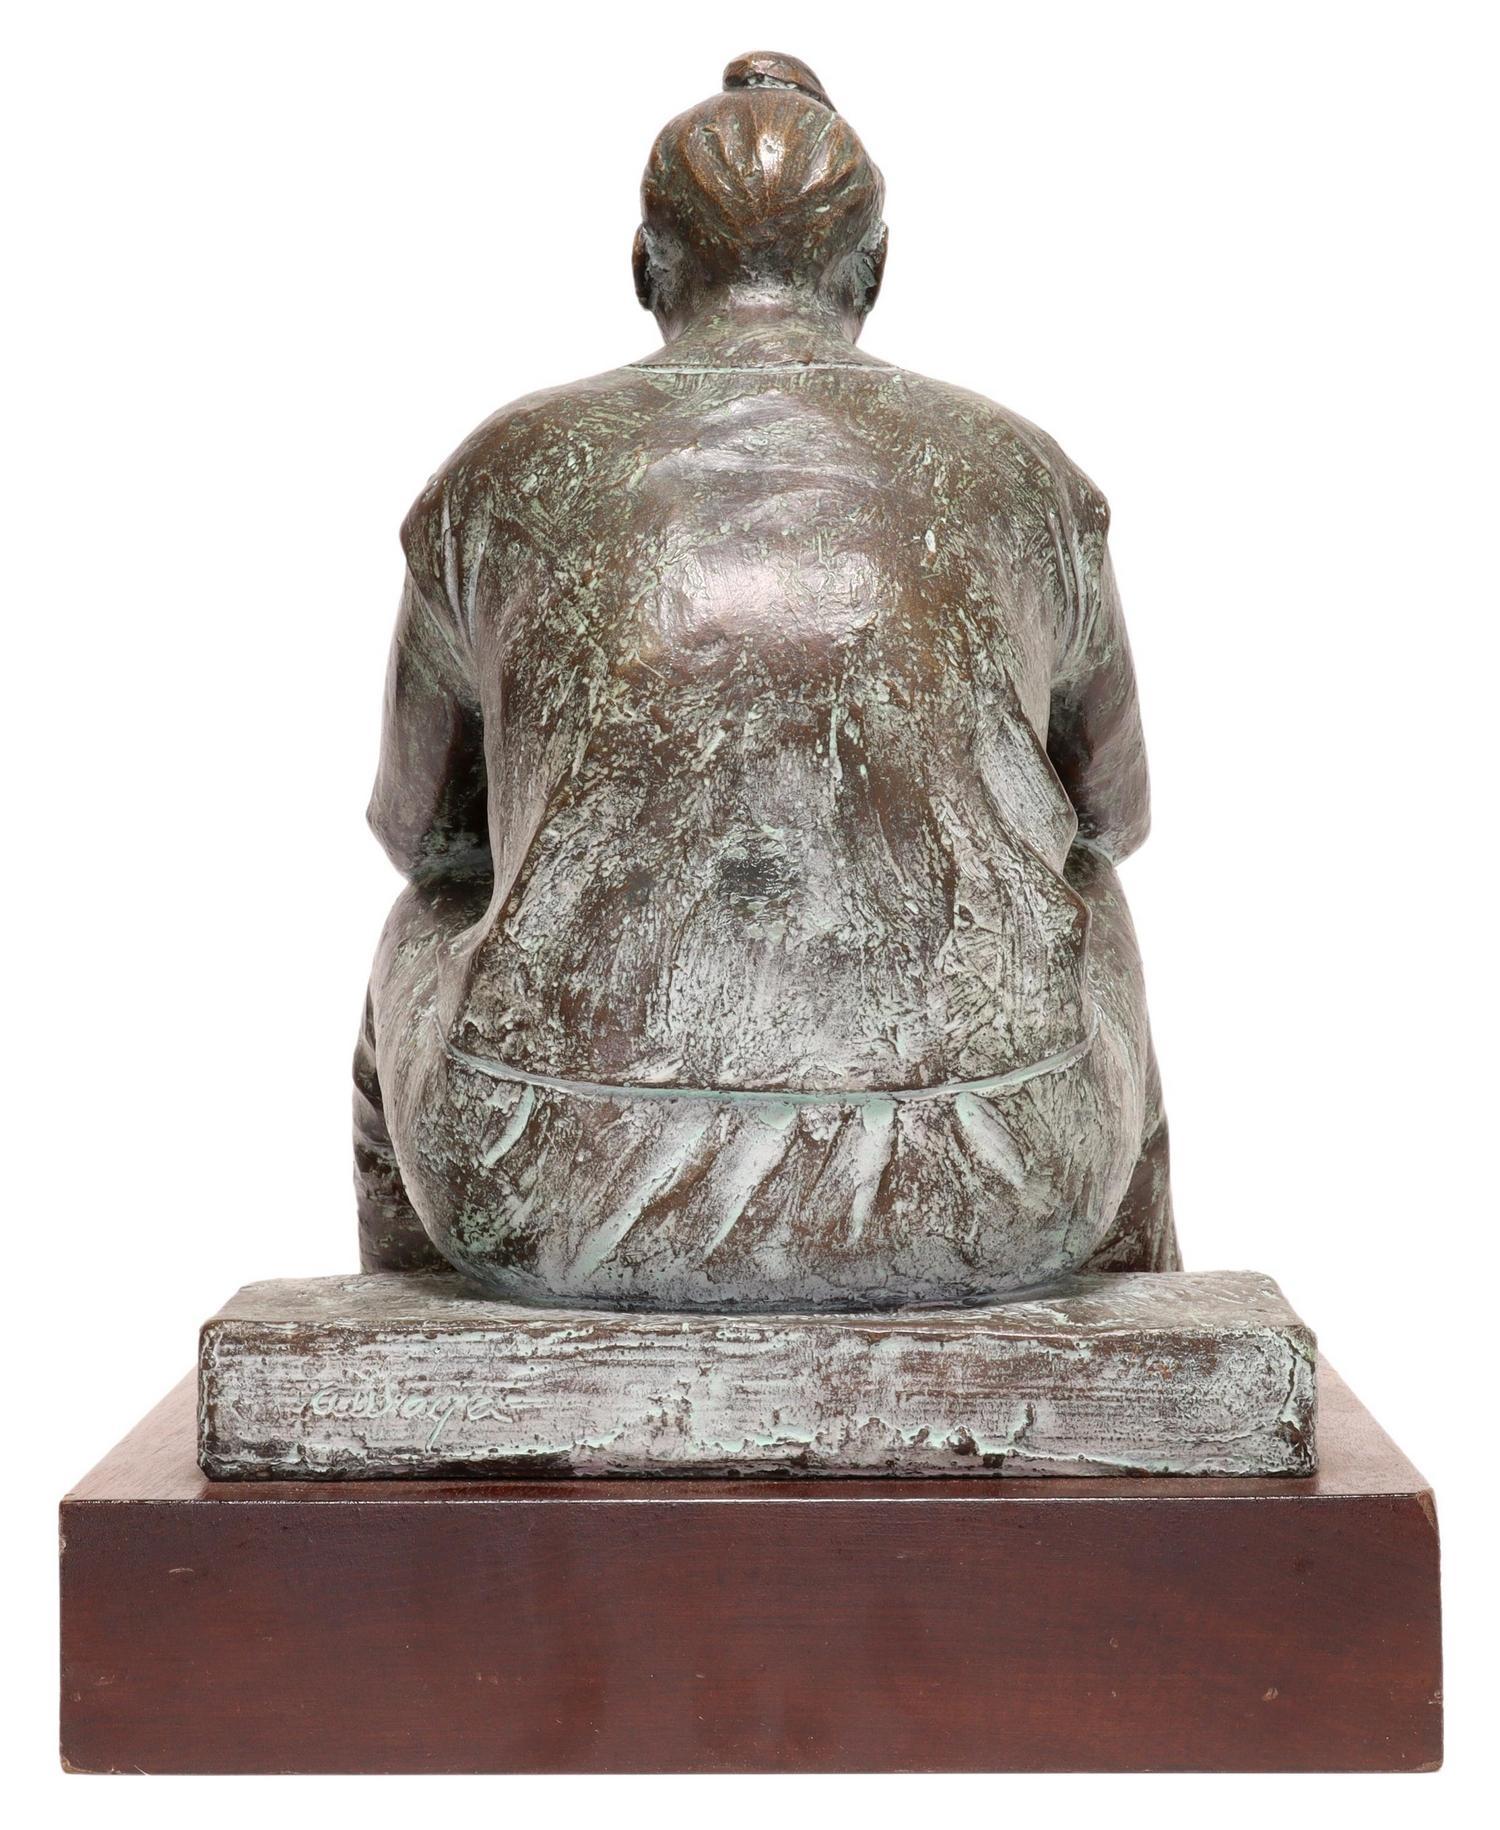 Martha de Tehuana en un Banco (Martha On The Bench)
Bronze sculpture, signed, original gallery label edition 1/11
Sculptor Armando Amaya was born in Mexico City in 1935, He studied at the National School of Painting and Sculpture under Jose Ruiz and